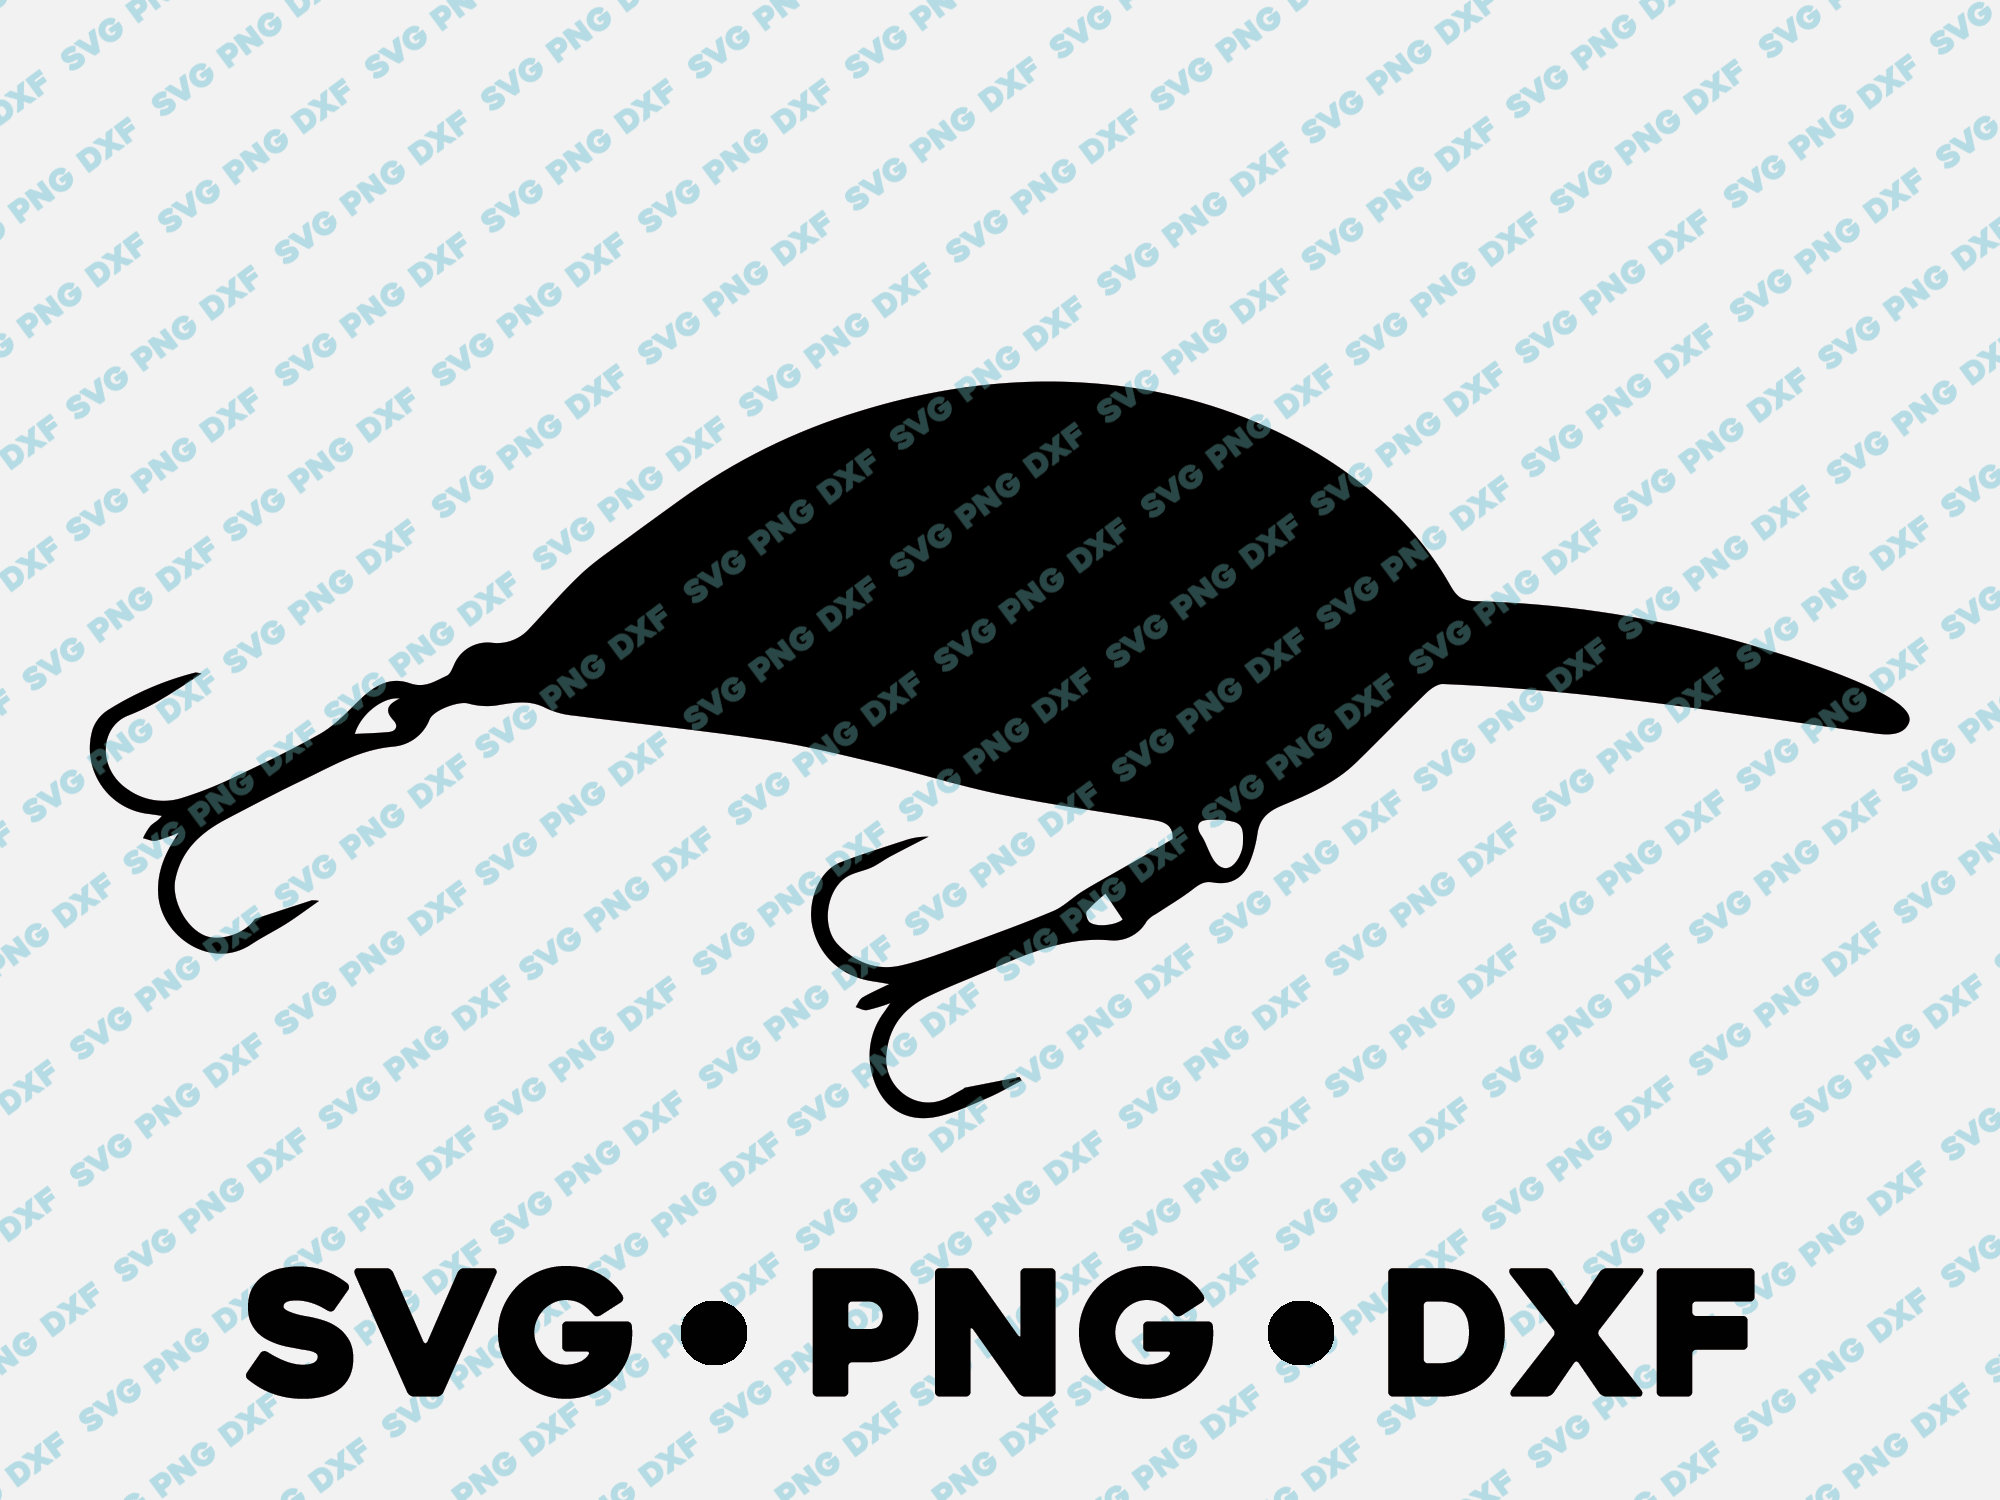 Crankbait Lure Fishing SVG PNG DXF Vector Transparent Cameo Silhouette Cut  Filehtv Vinyl Decal Fishing Hunting Outdoors Nature Animal 